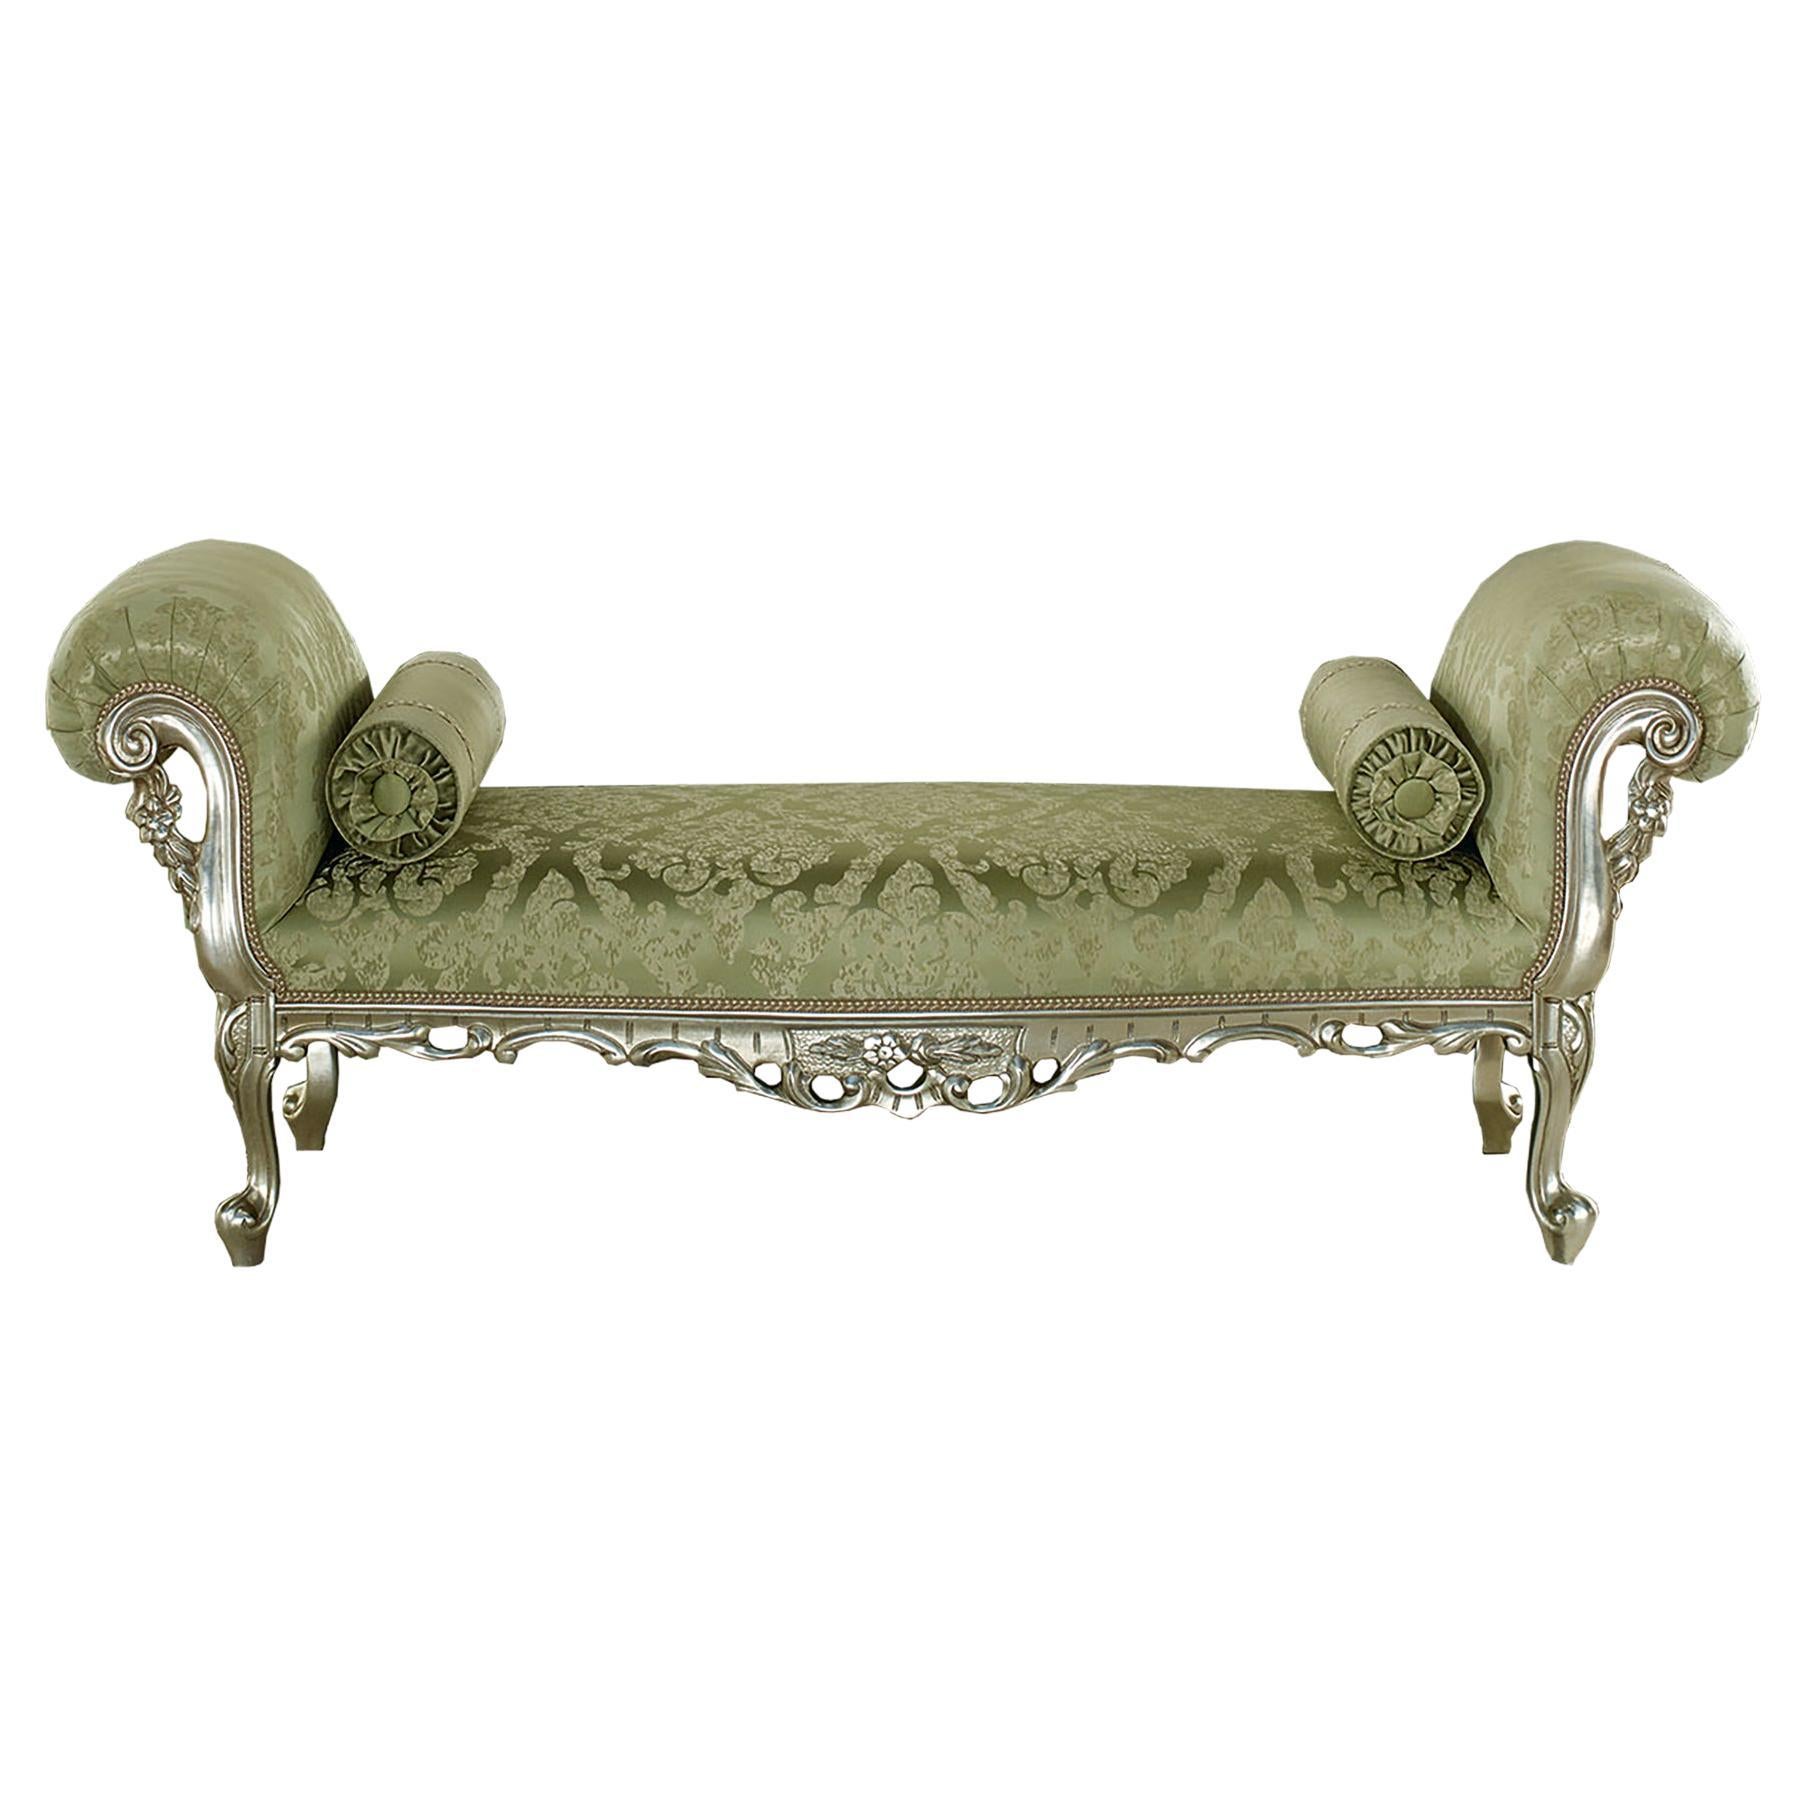 21st Century Deluxe Baroque Green Bed Bench by Modenese Interiors, Silver Leaf